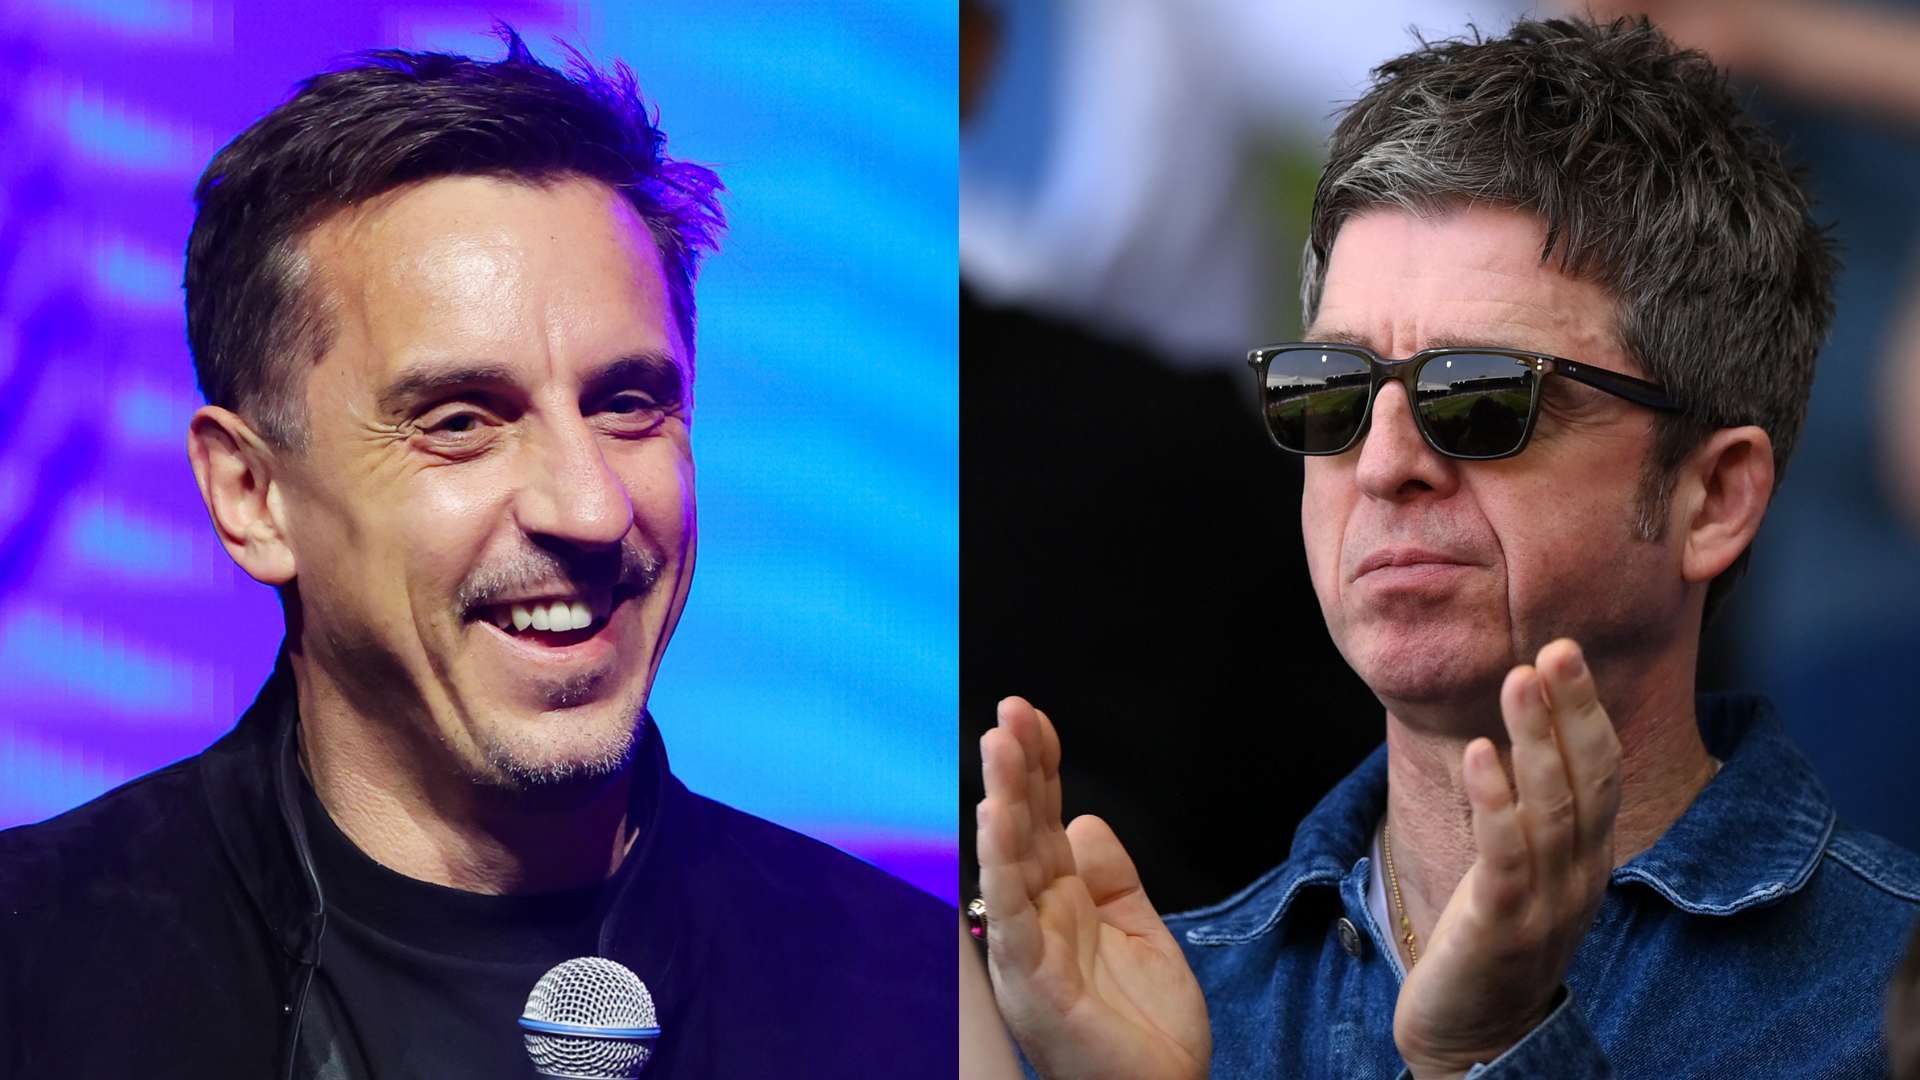 Gary Neville and Noel Gallagher